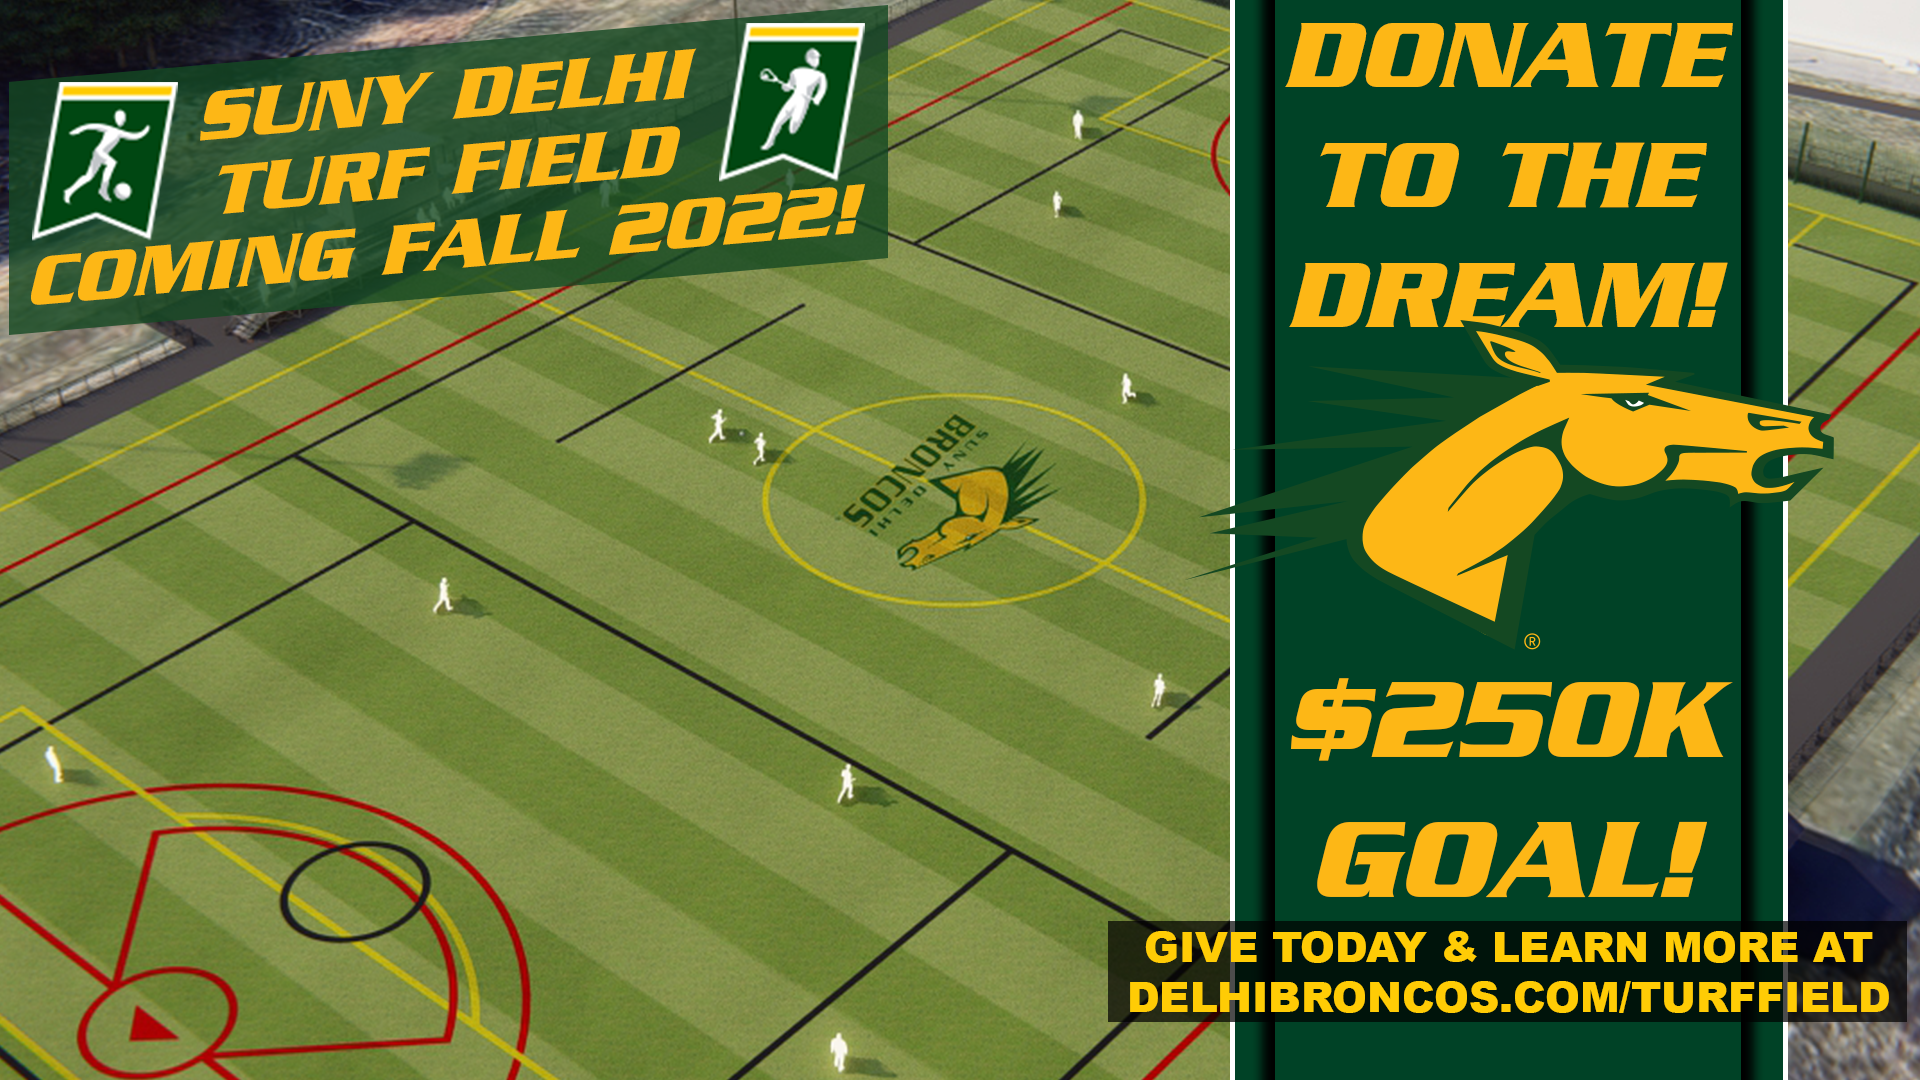 Fundraising Campaign Underway for SUNY Delhi's New Athletic Turf Facility!